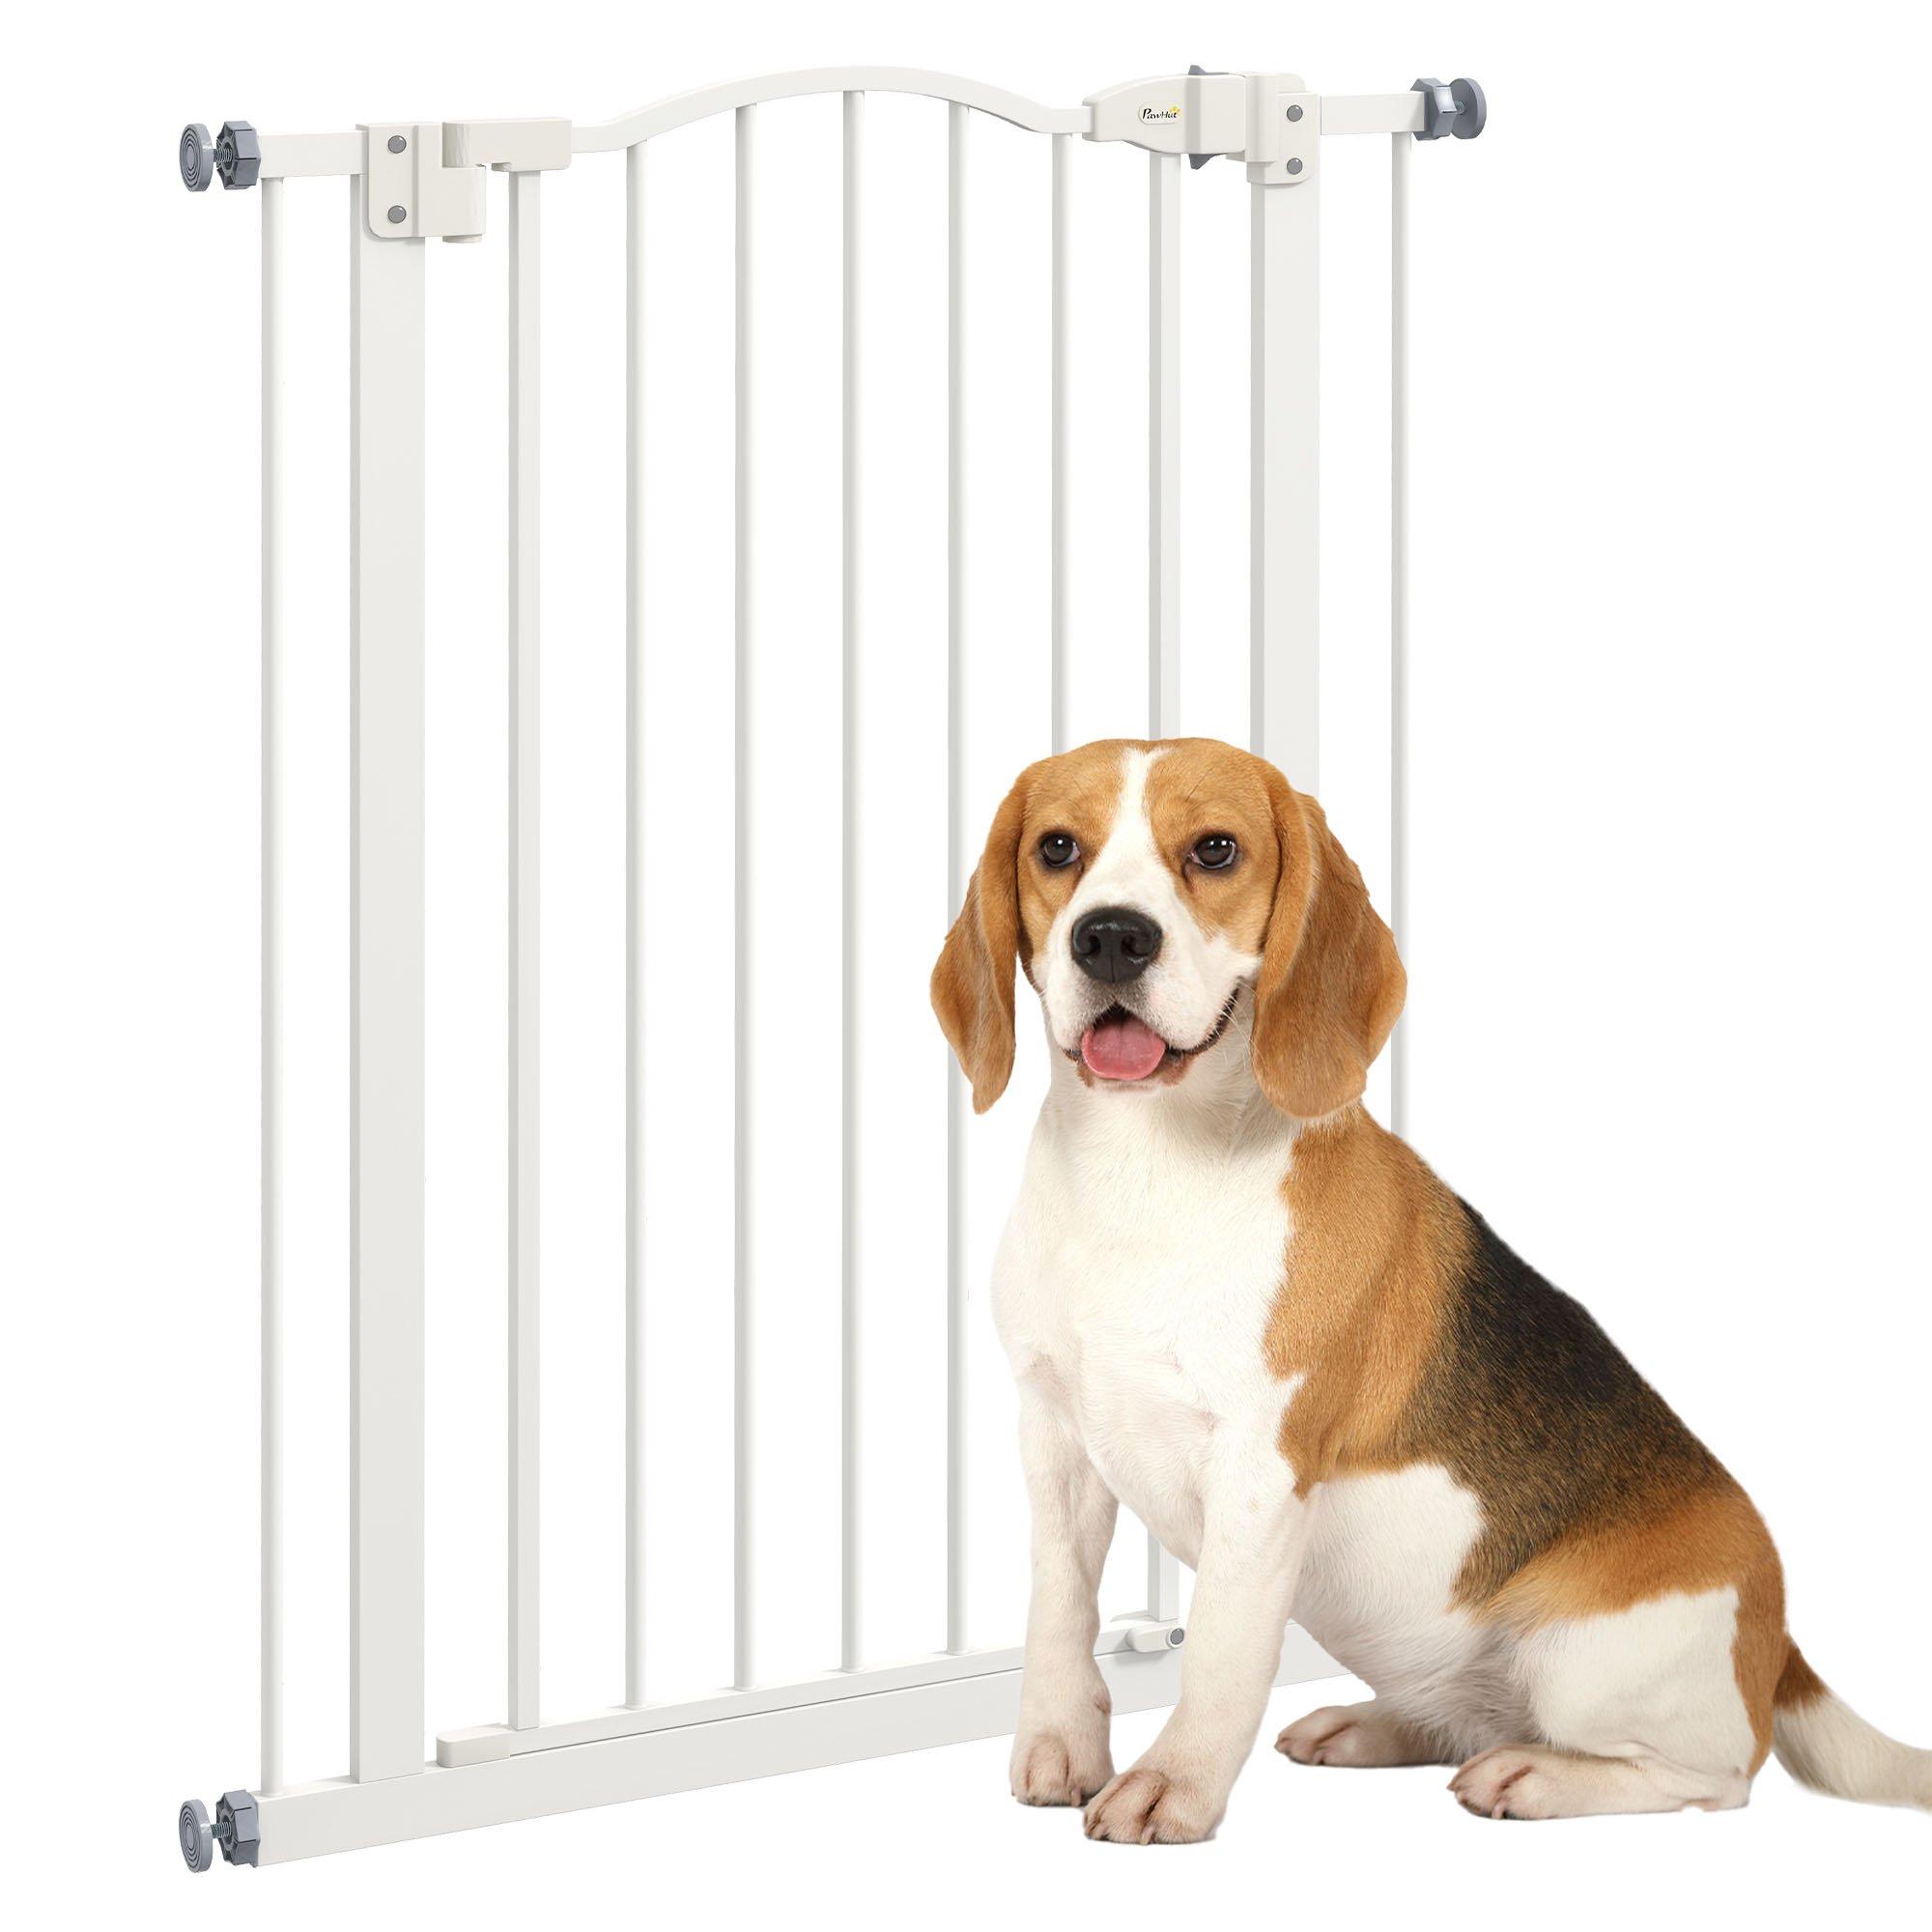 74-80cm Adjustable Metal Pet Gate Safety Barrier with Auto-Close Door